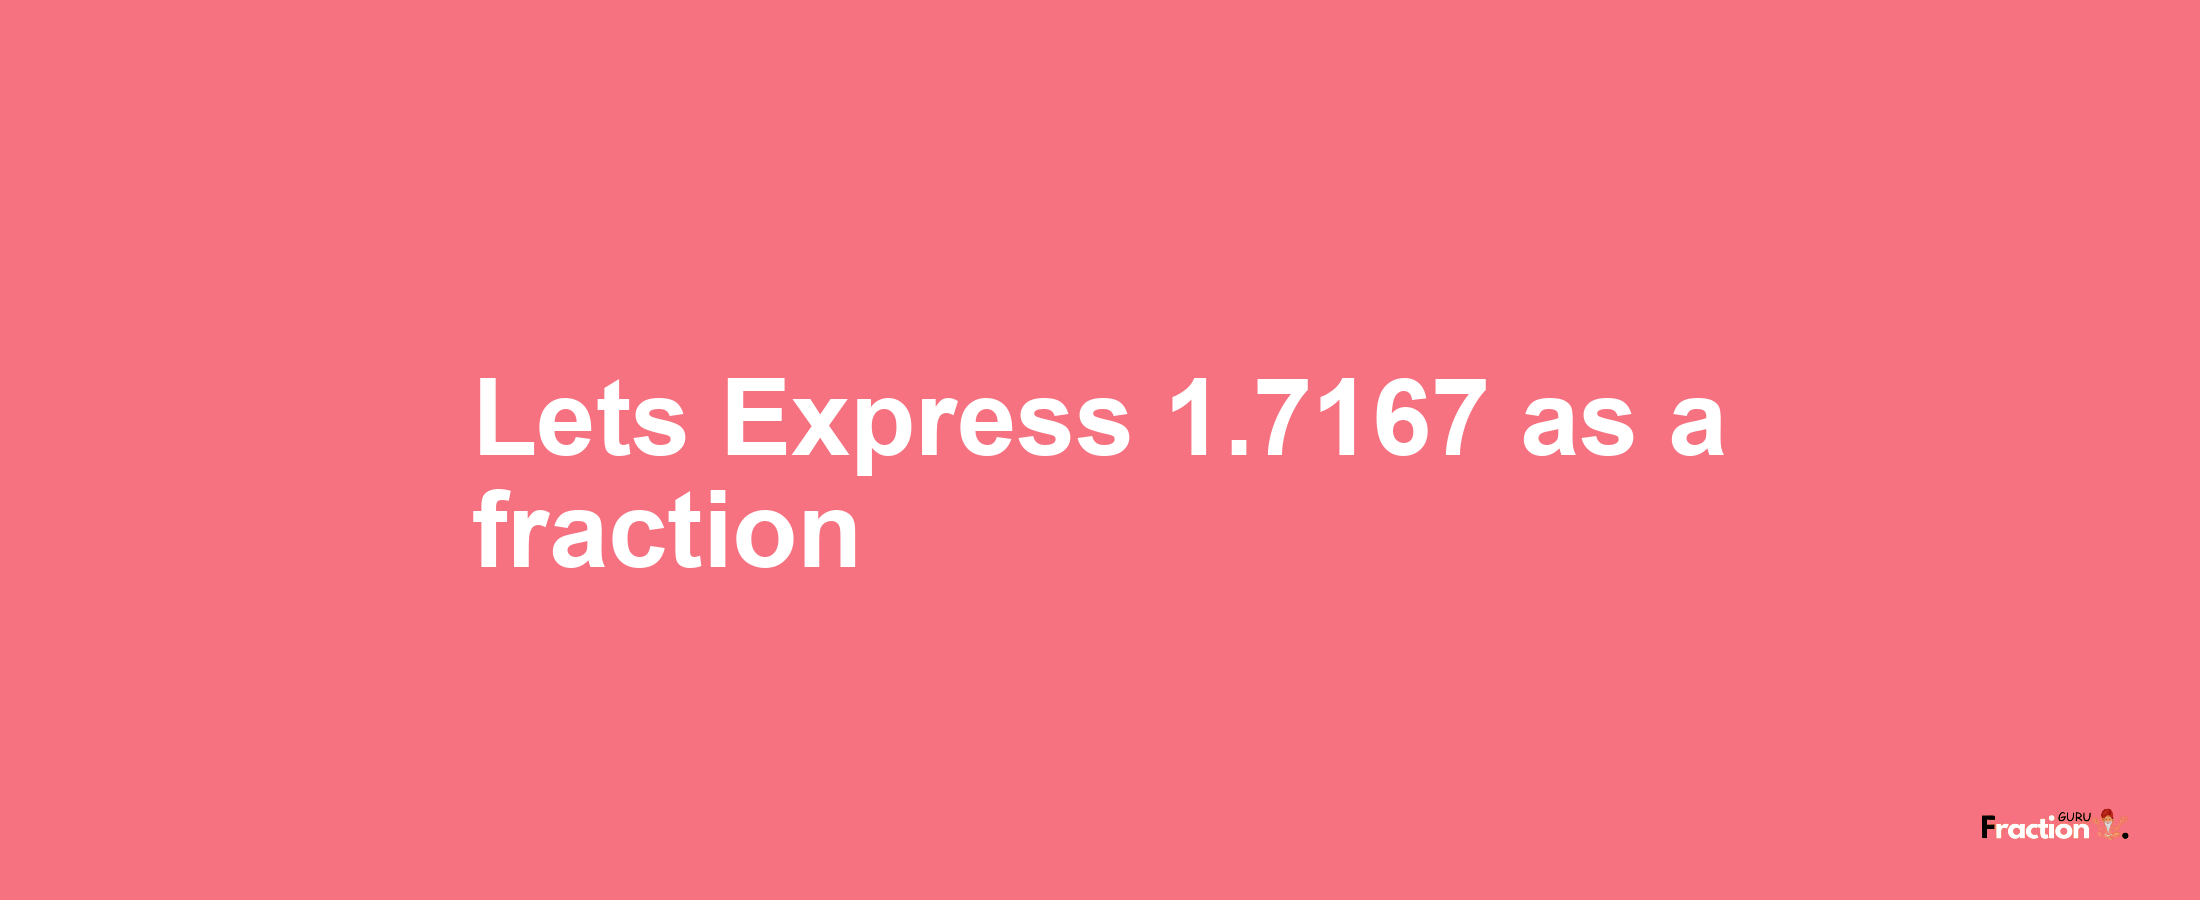 Lets Express 1.7167 as afraction